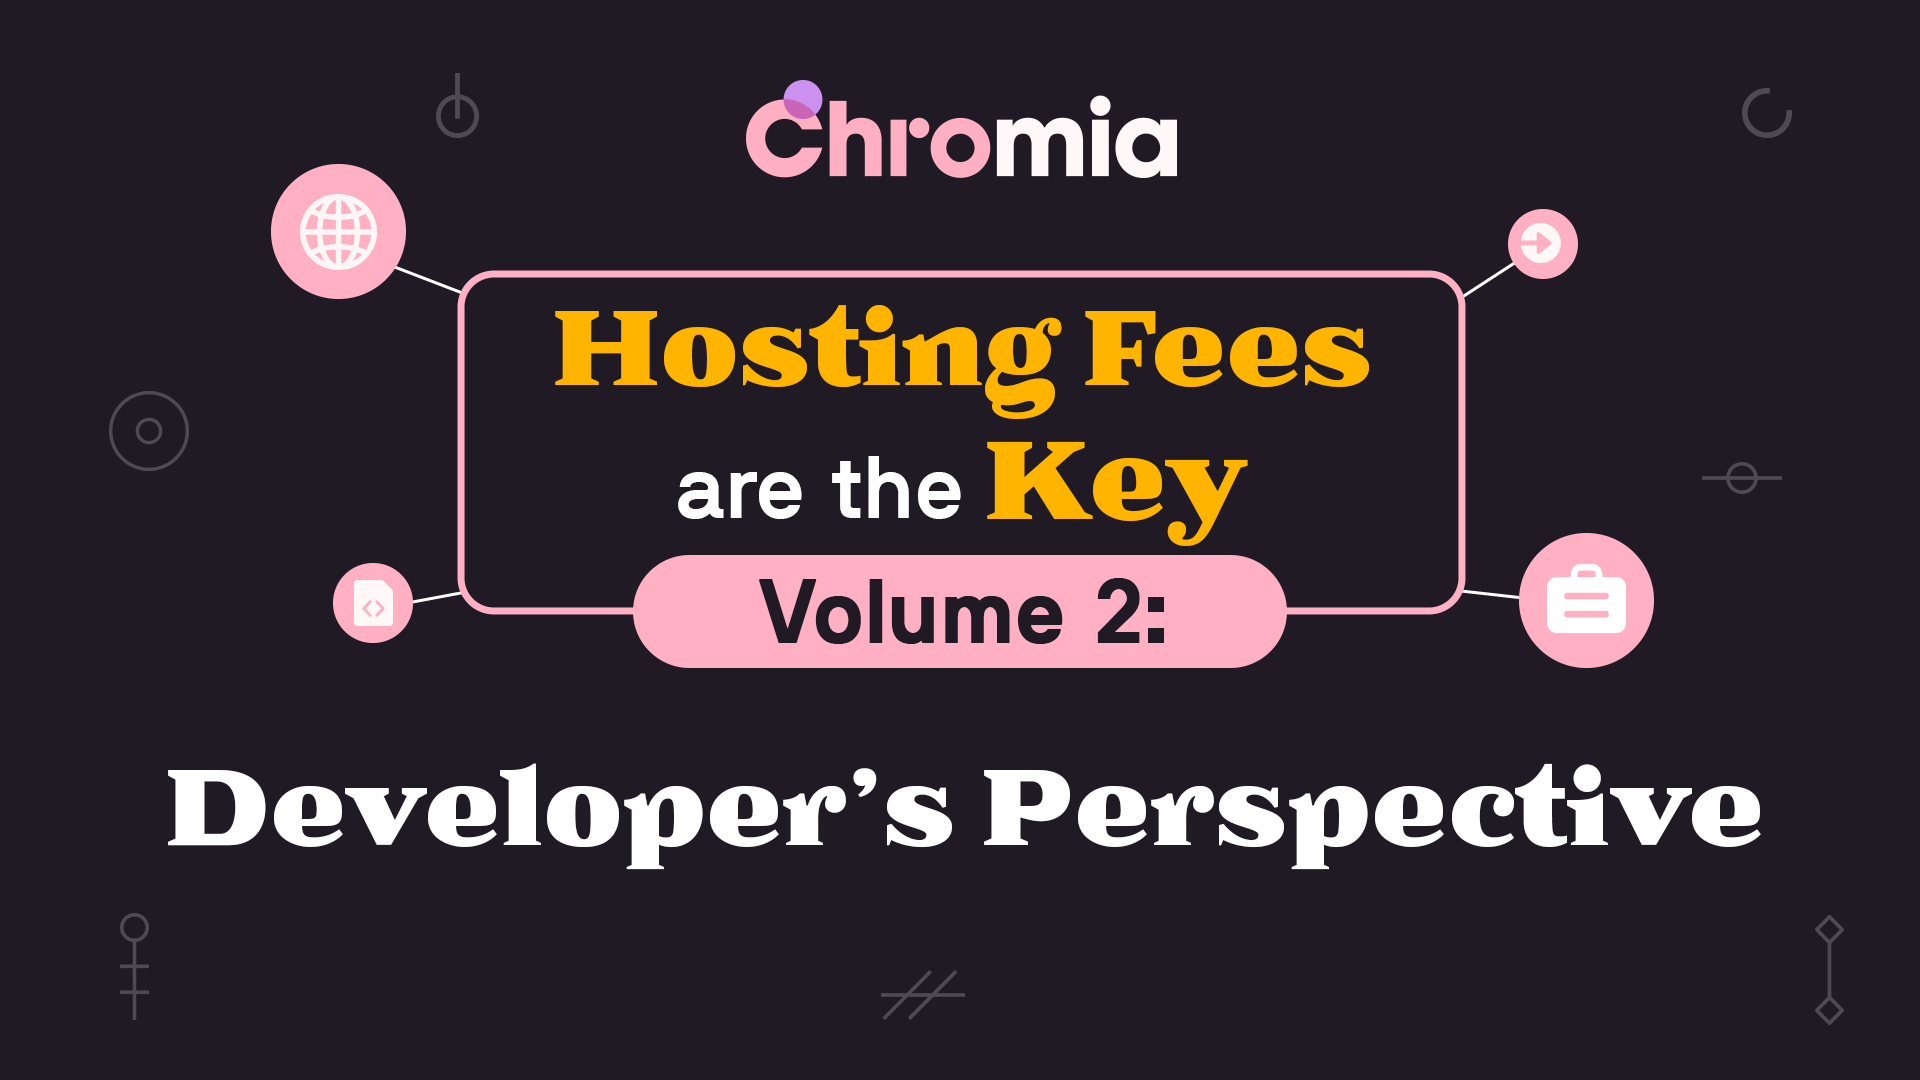 Hosting Fees are the Key, Volume 2: Developer’s Perspective